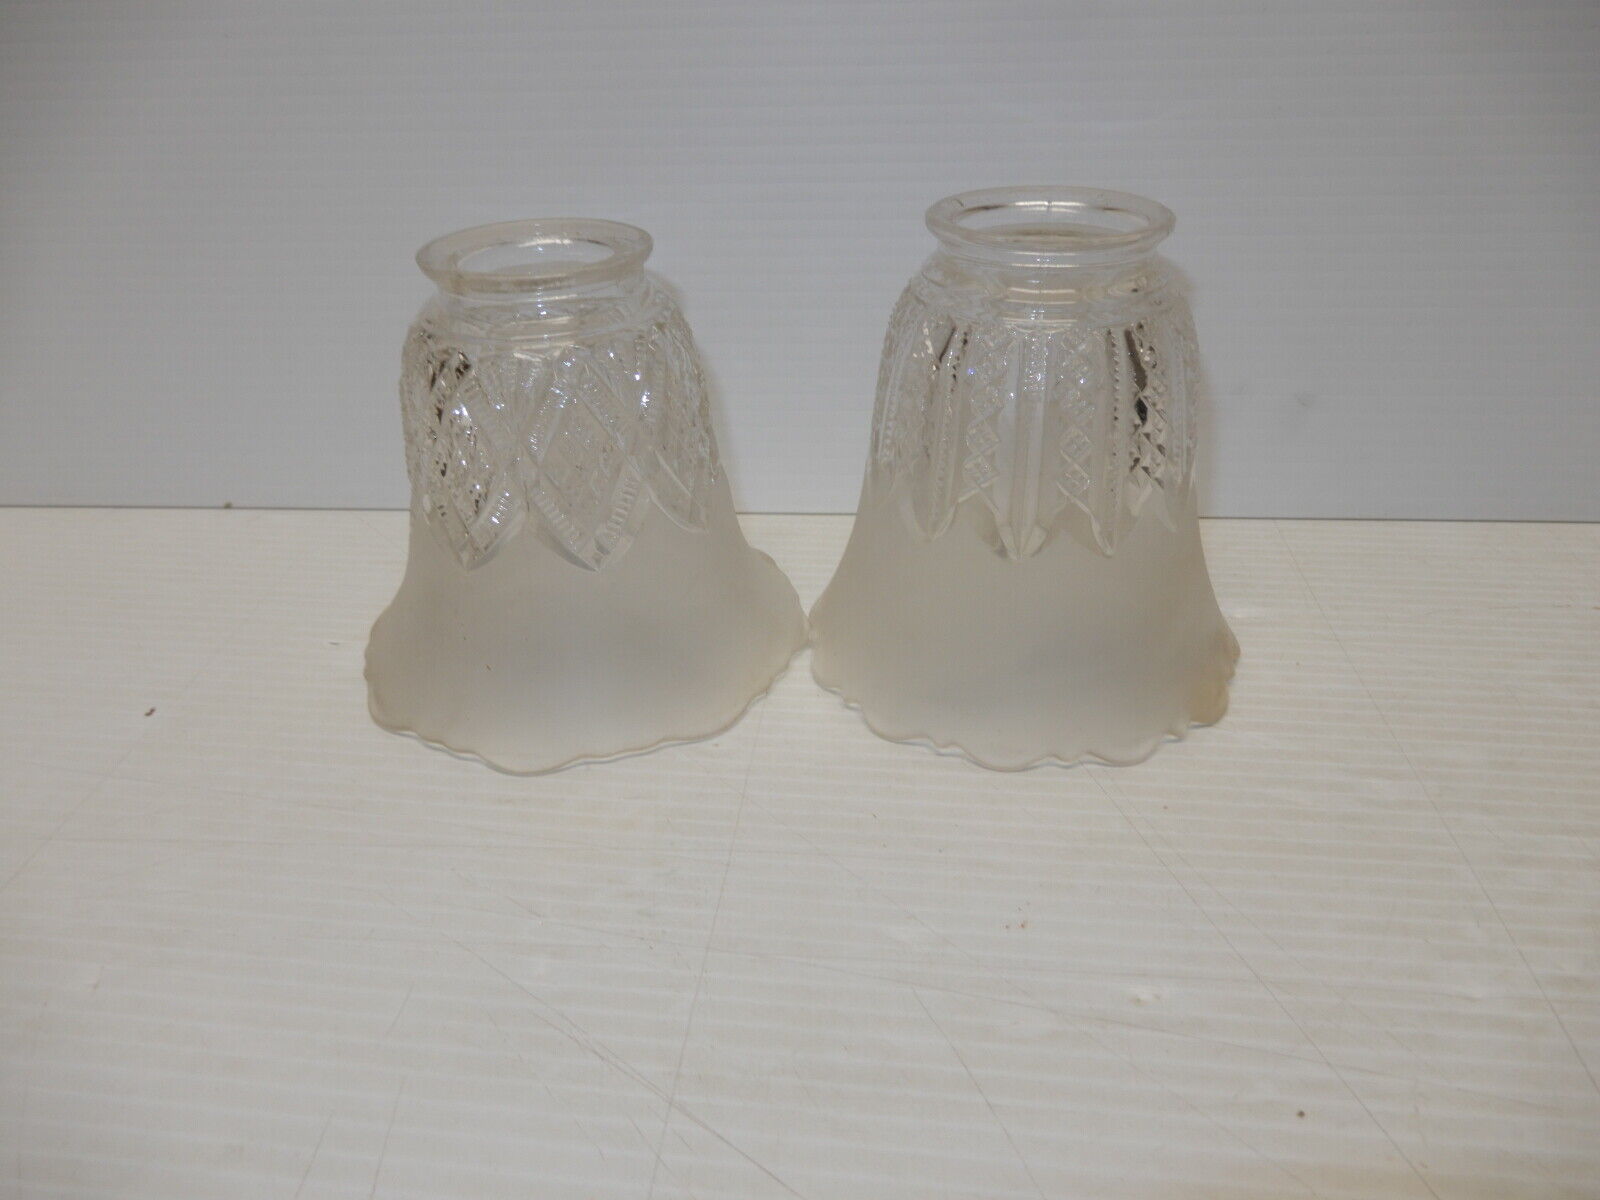 ANTIQUE NEAR PAIR PRESSED GLASS ELECTRIC LIGHT LAMP SHADES